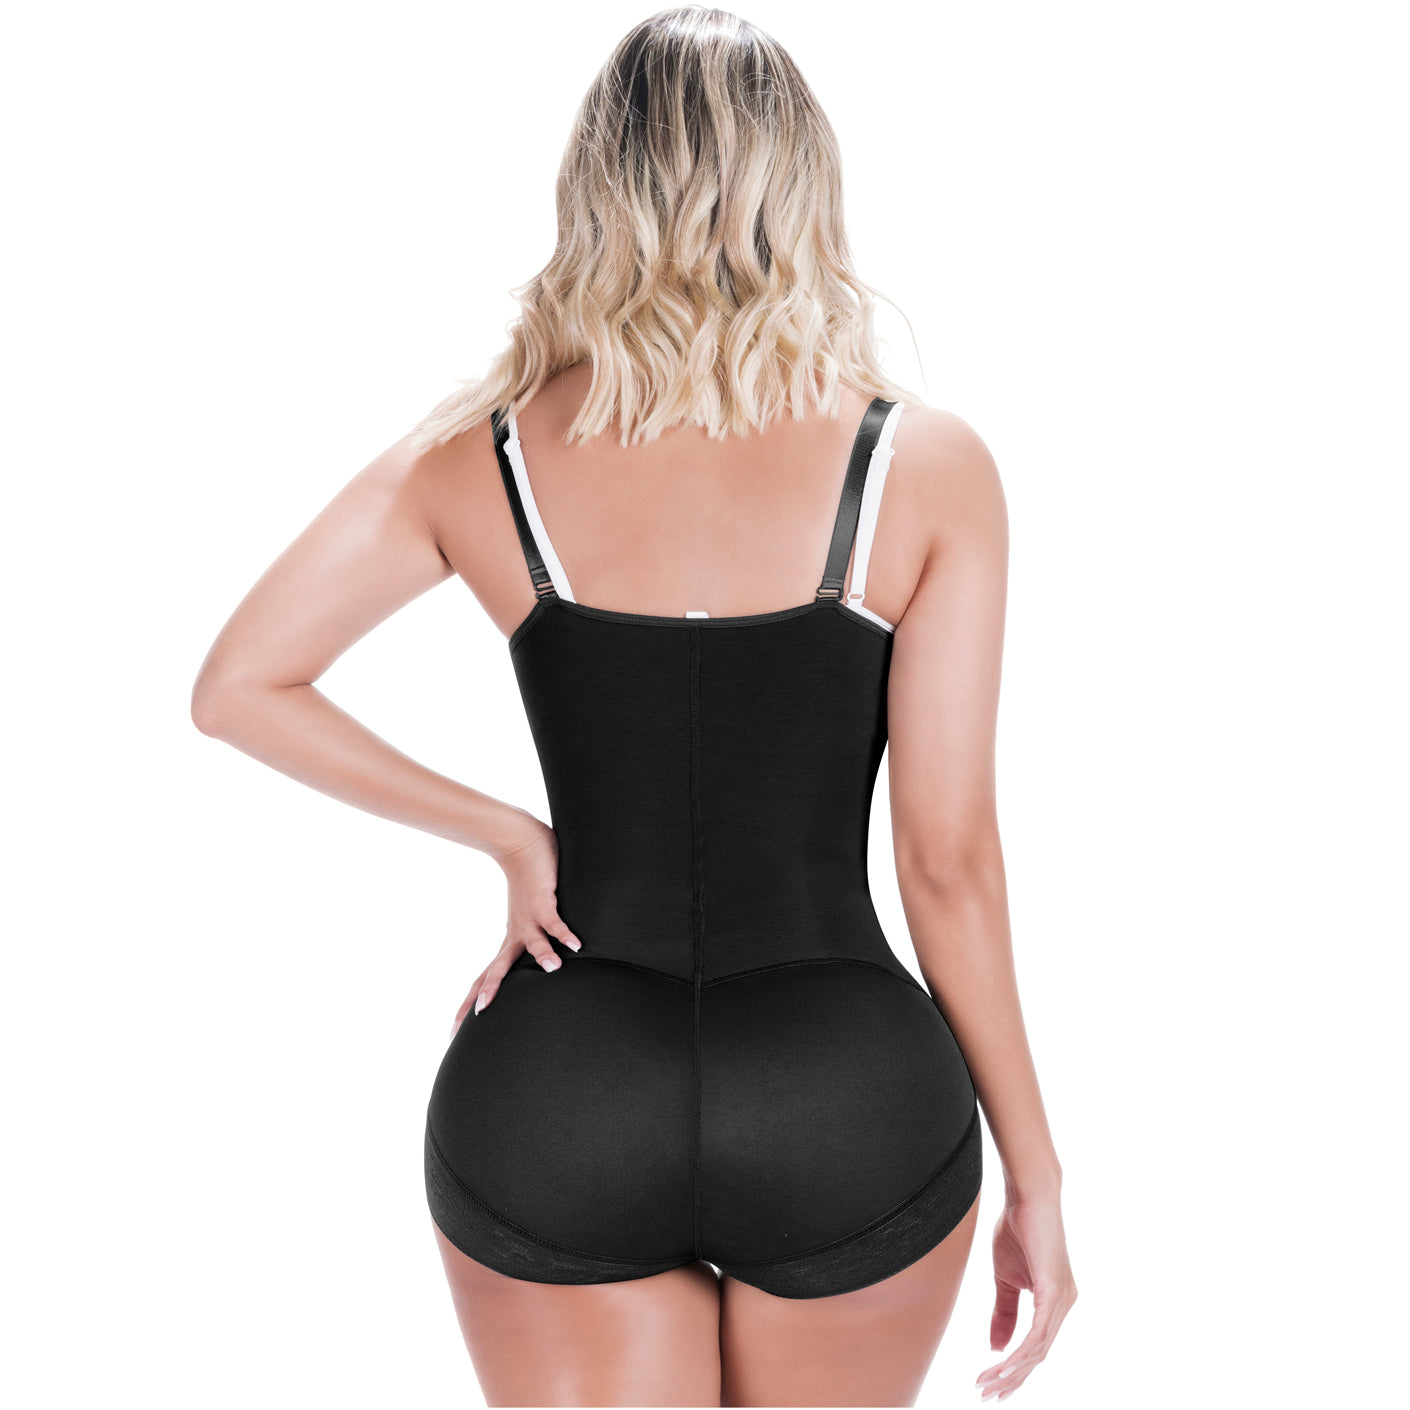 COLOMBIAN FULL SHAPEWEAR WITH BRA BUTT LIFTER POST-SURGERY GIRDLE SONRYSE  52BF